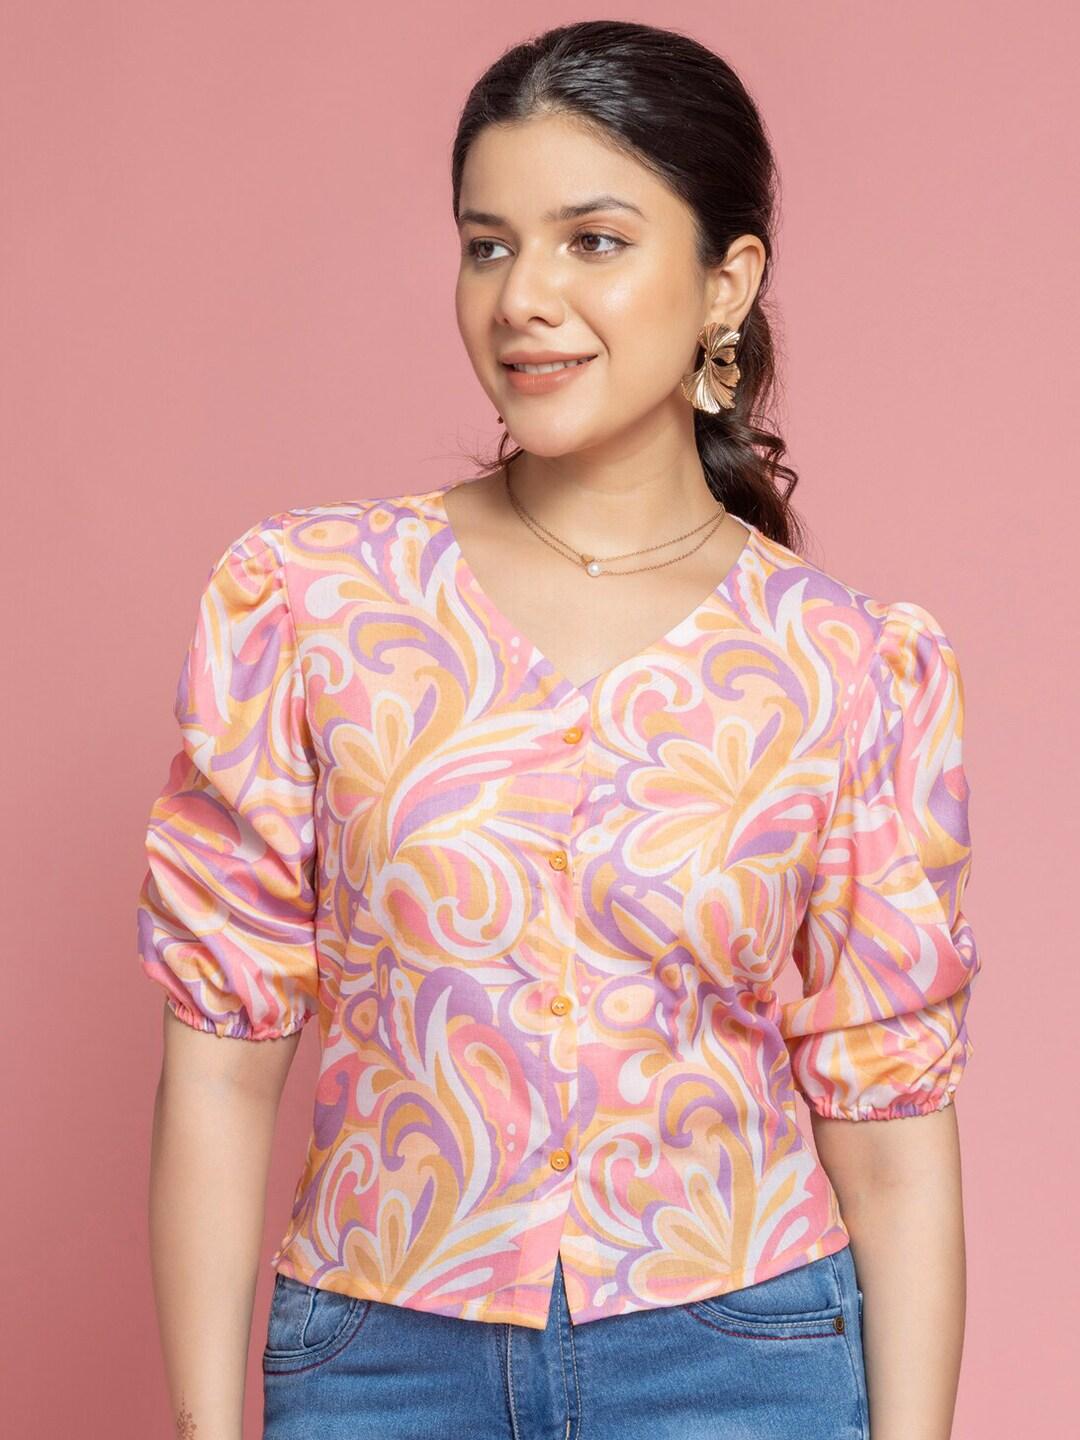 SEW YOU SOON Pink Print Puff Sleeve Cotton Shirt Style Top